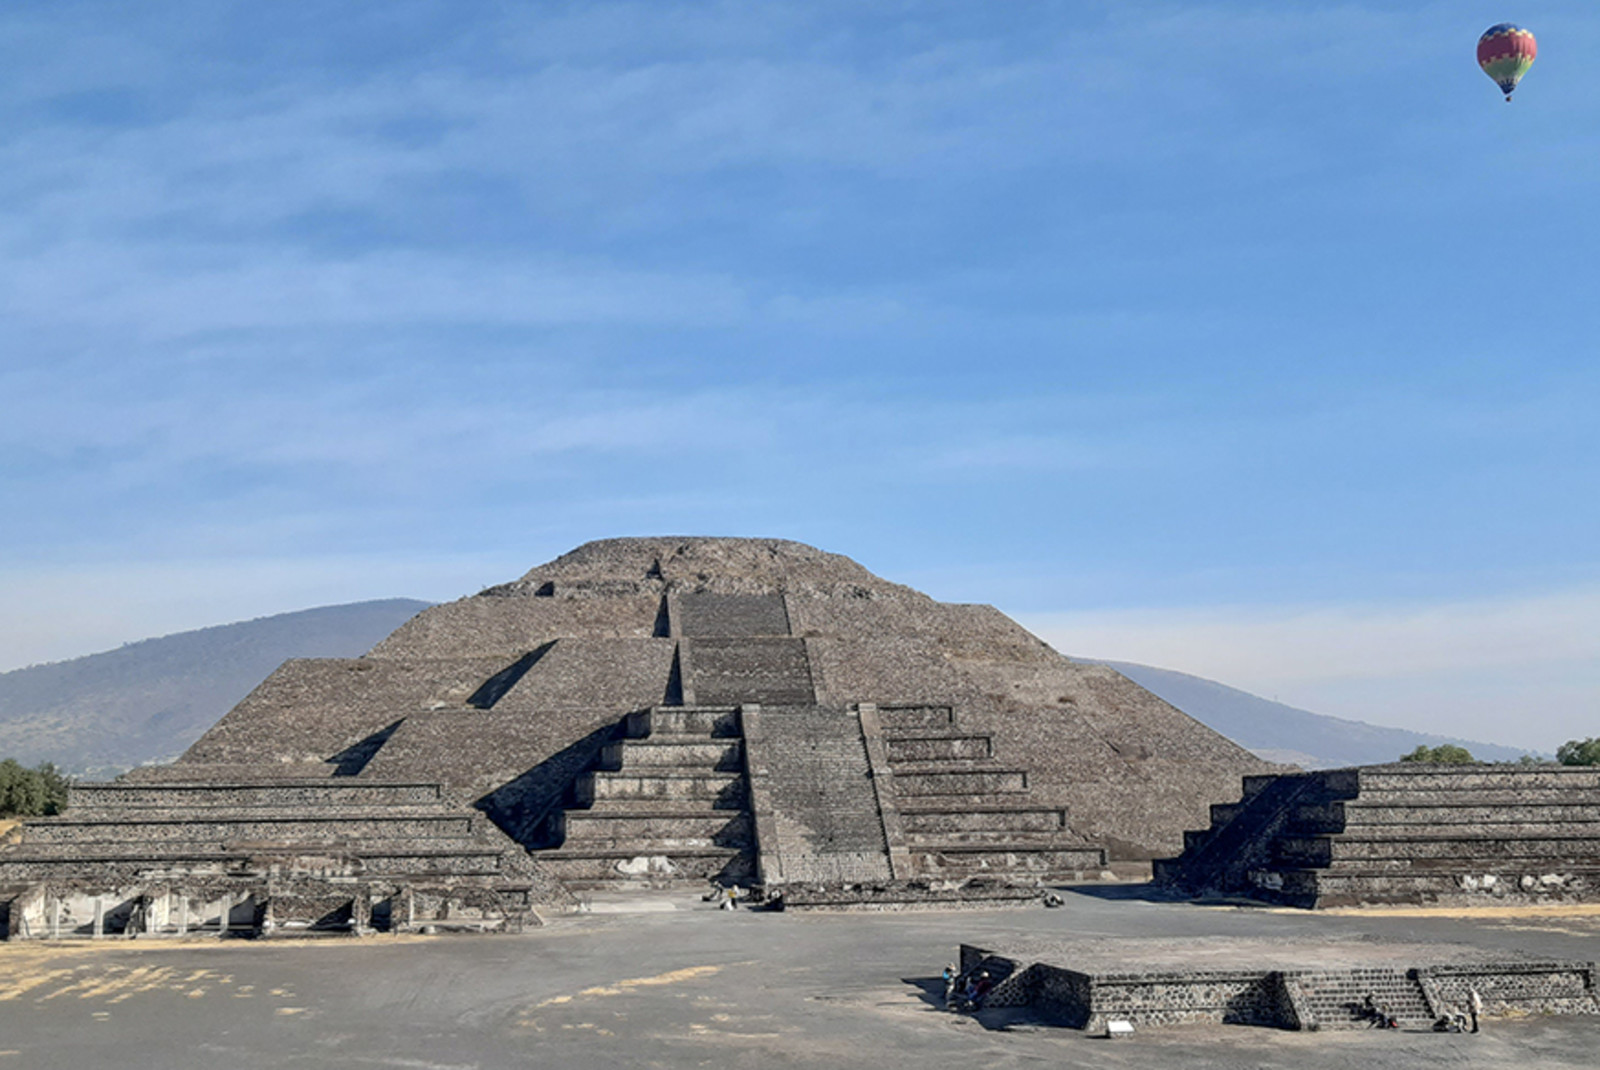 The Pyramid of the Sun, located outside of Mexico City, Mexico.